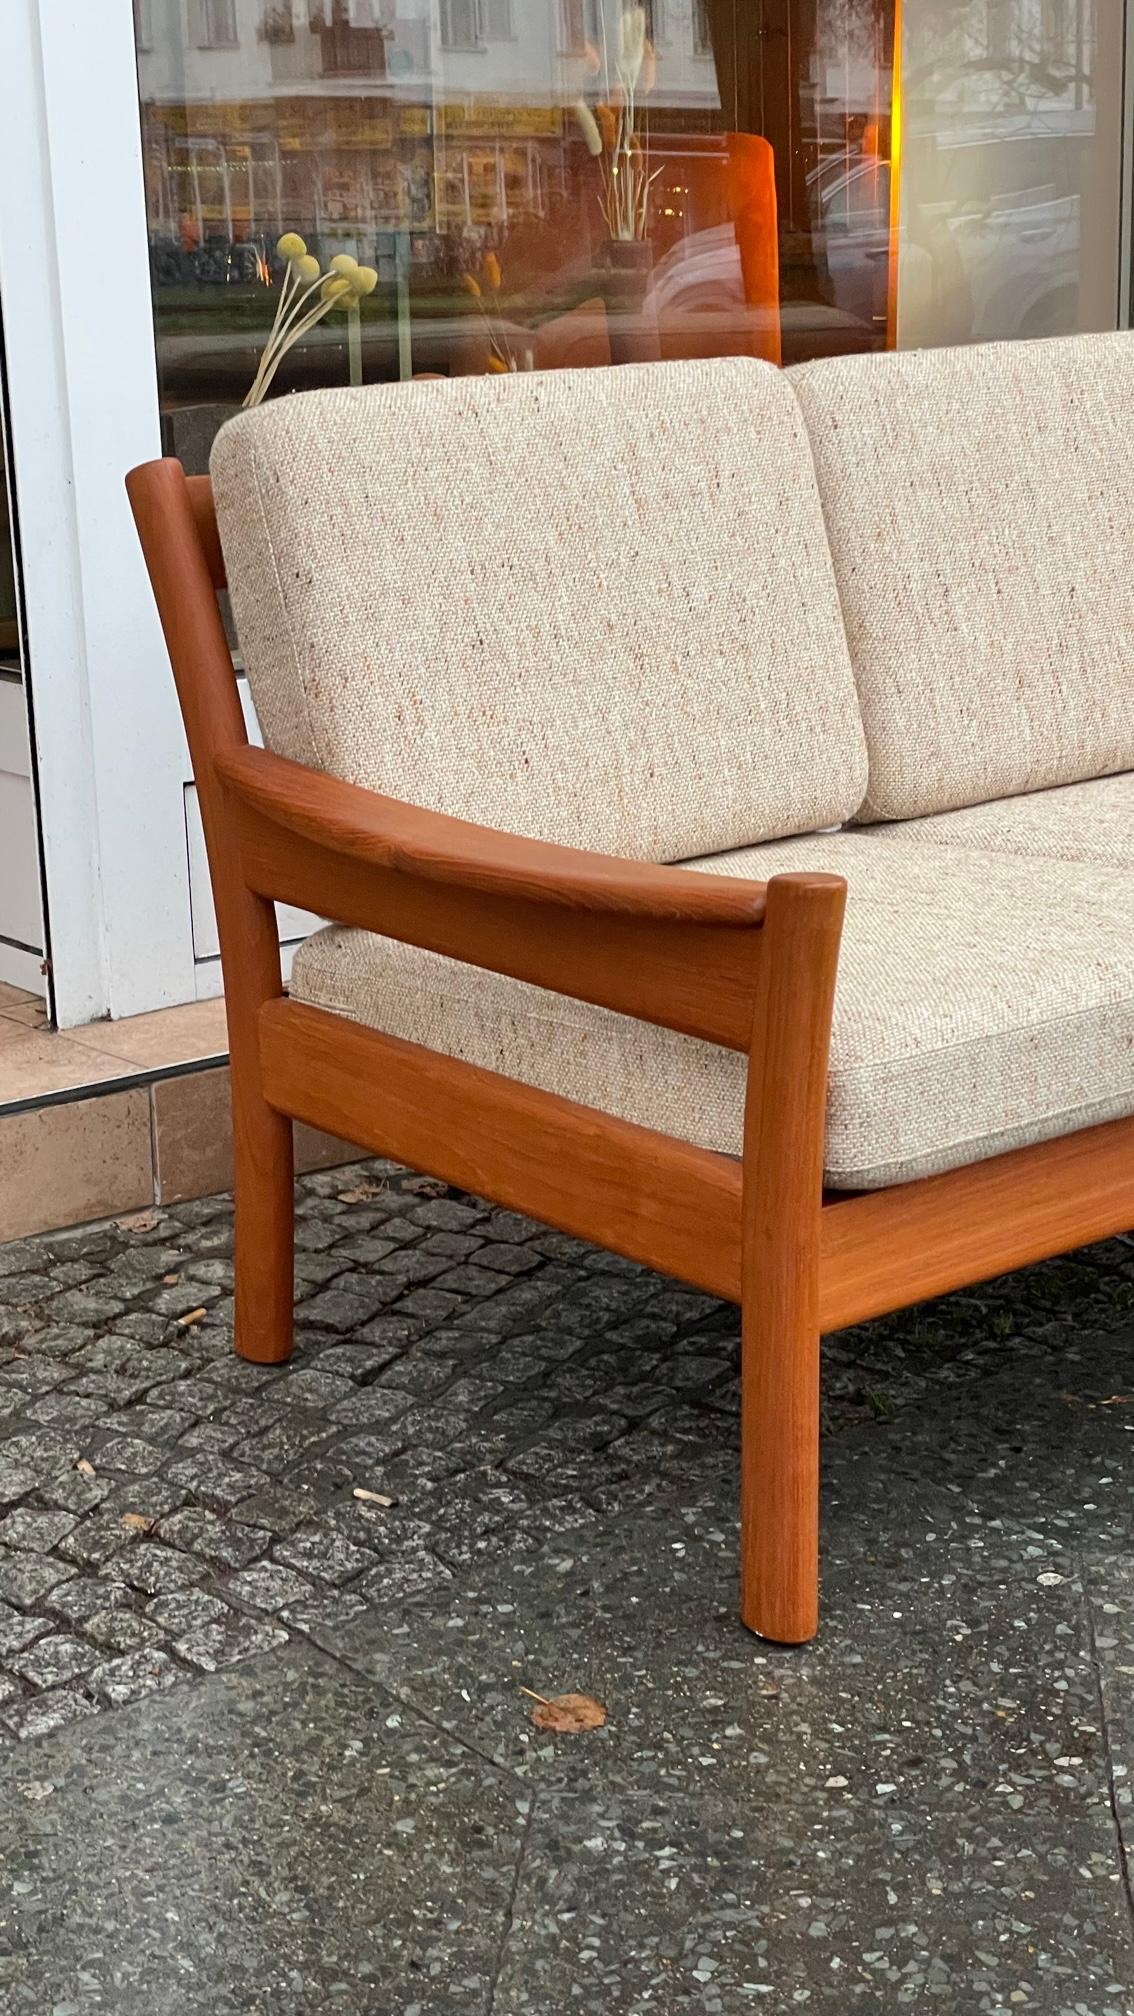 European Danish Sofa in Wood and Wool from Dyrlund, 1960s For Sale